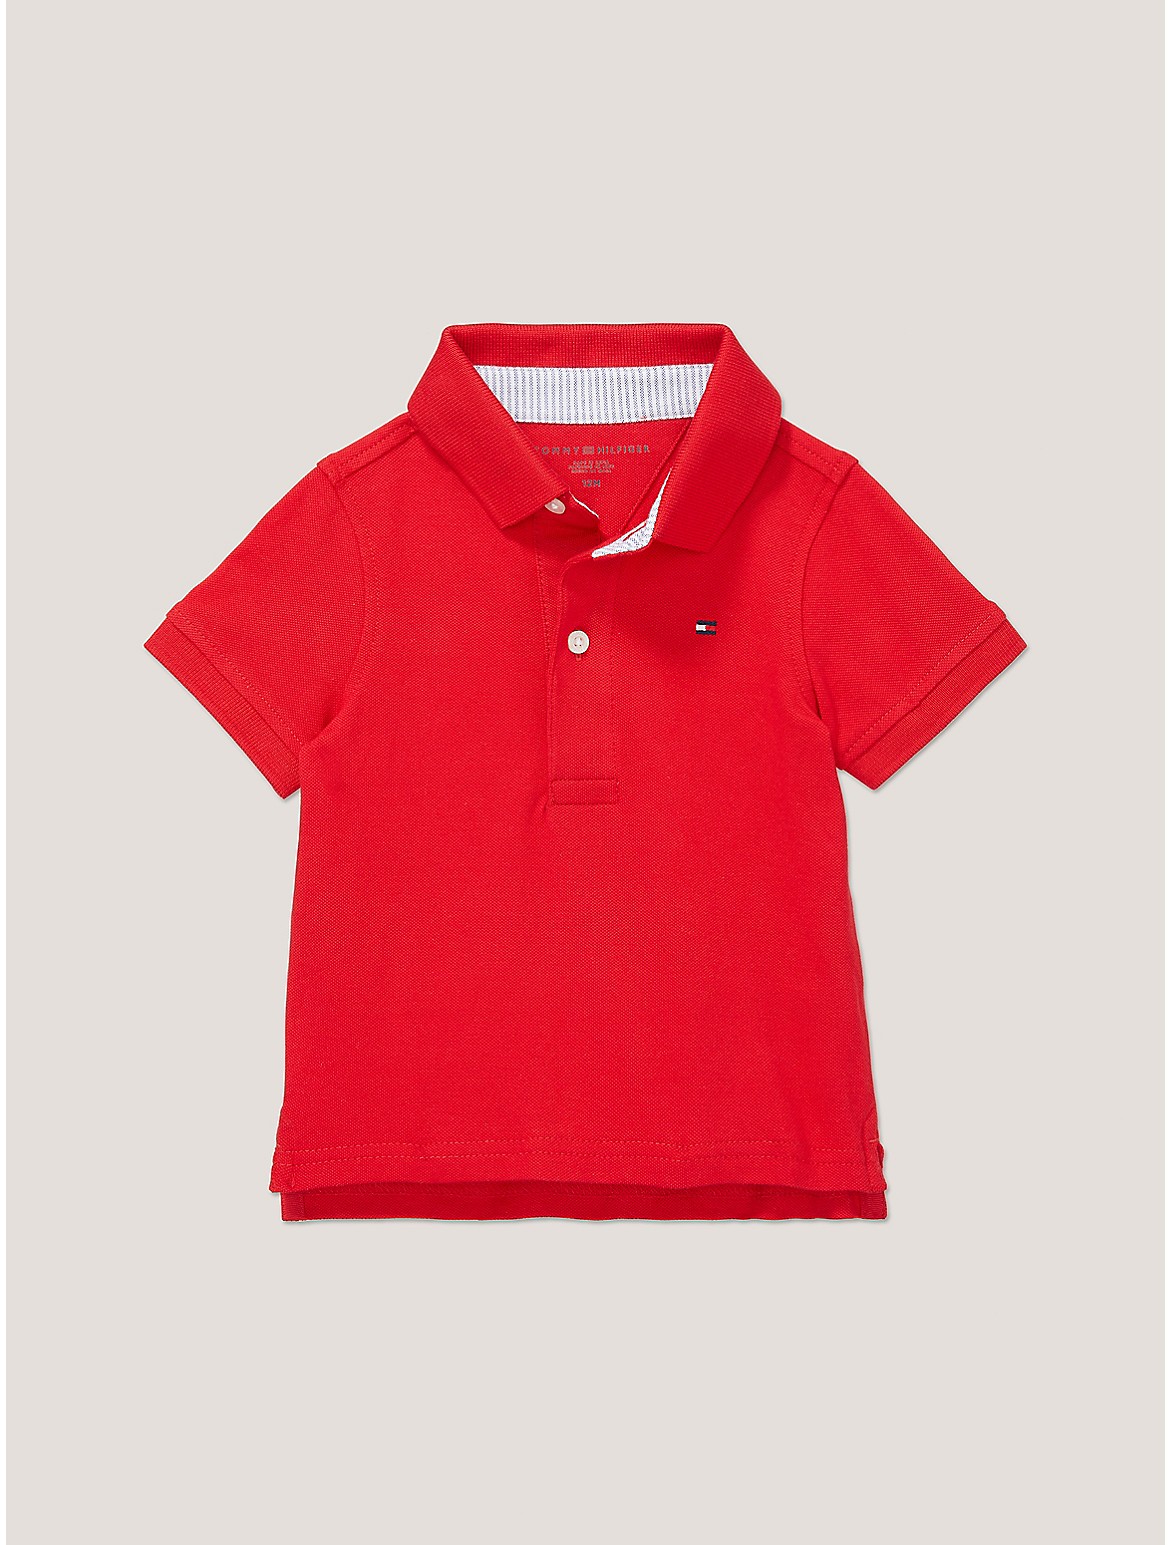 Tommy Hilfiger Boys' Babies' Solid Stretch Polo - Red - 3-6M